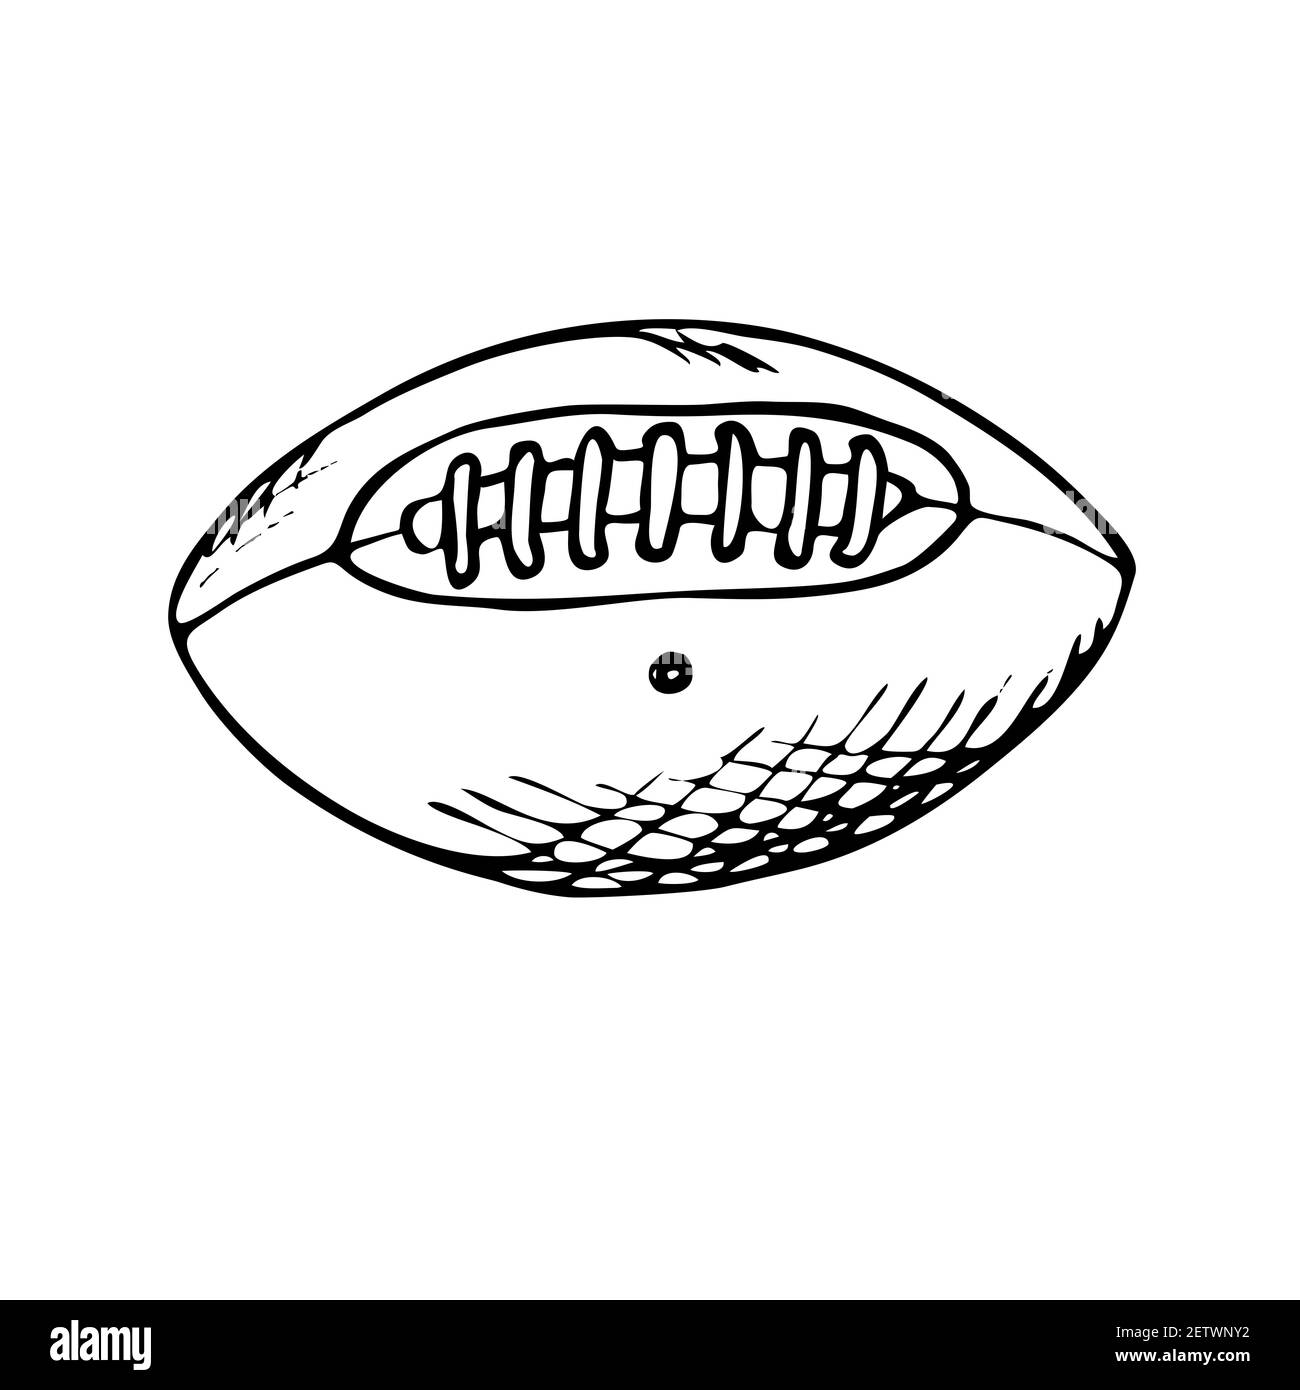 Rugby ball, doodle outline drawing, woodcut style Stock Photo